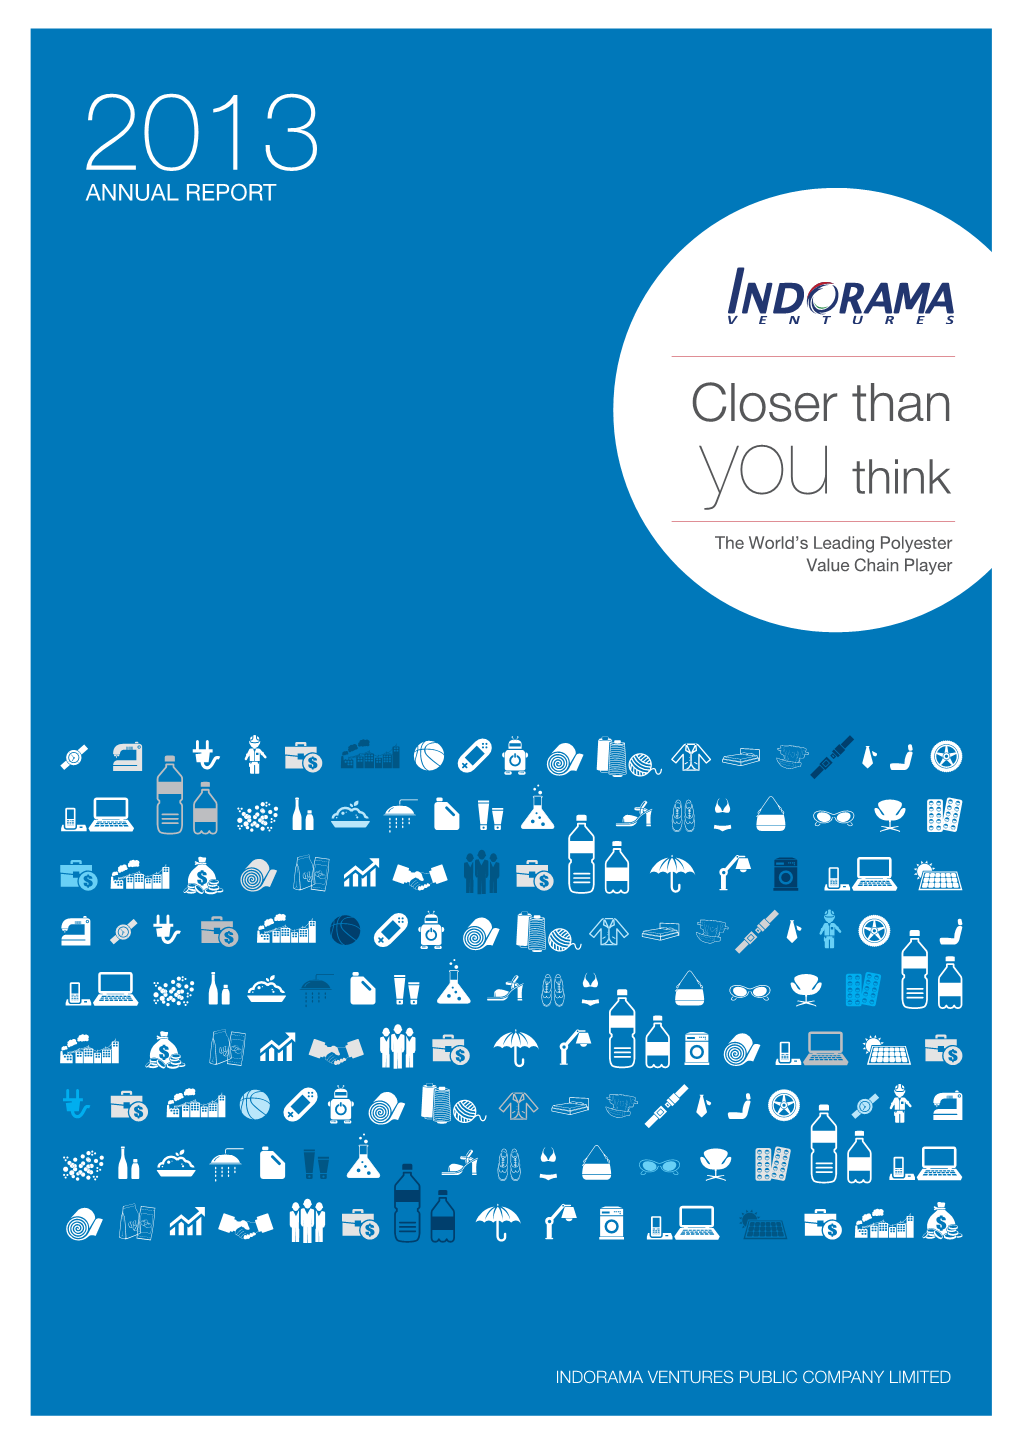 IVL: Indorama Ventures Public Company Limited | Annual Report